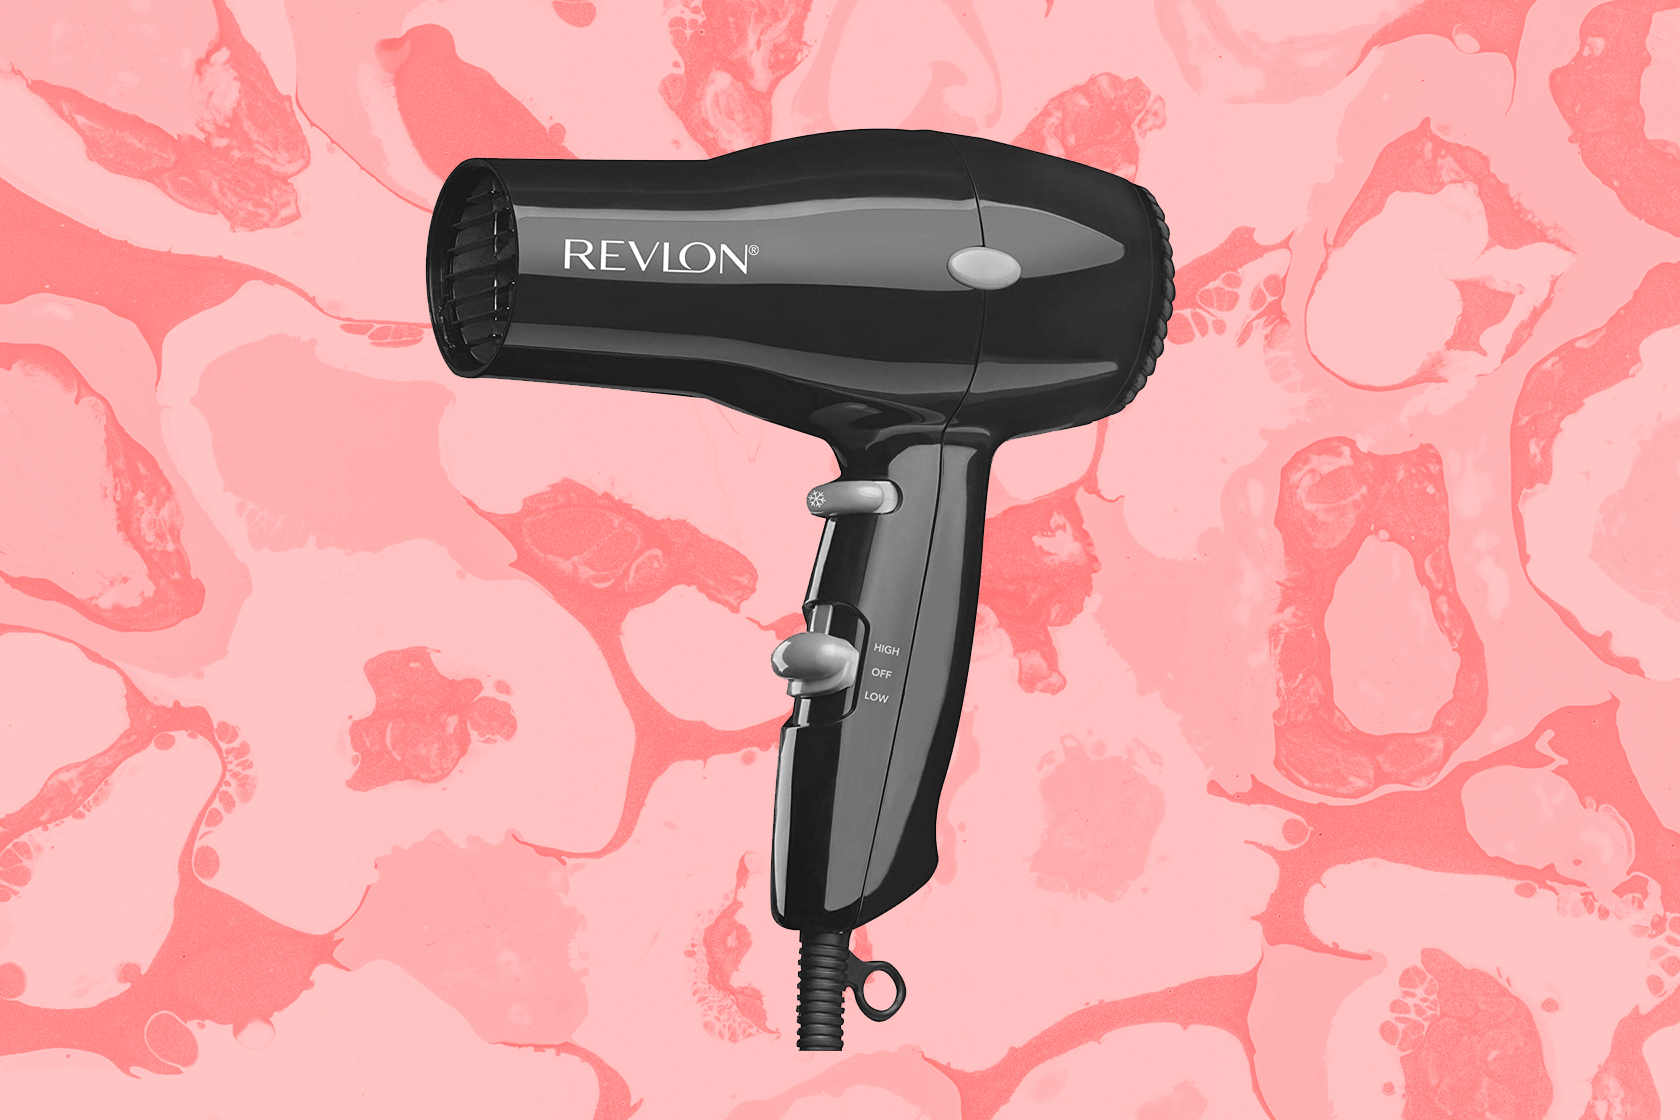 This travel-sized Revlon hair dryer is less than $7 on Amazon right now